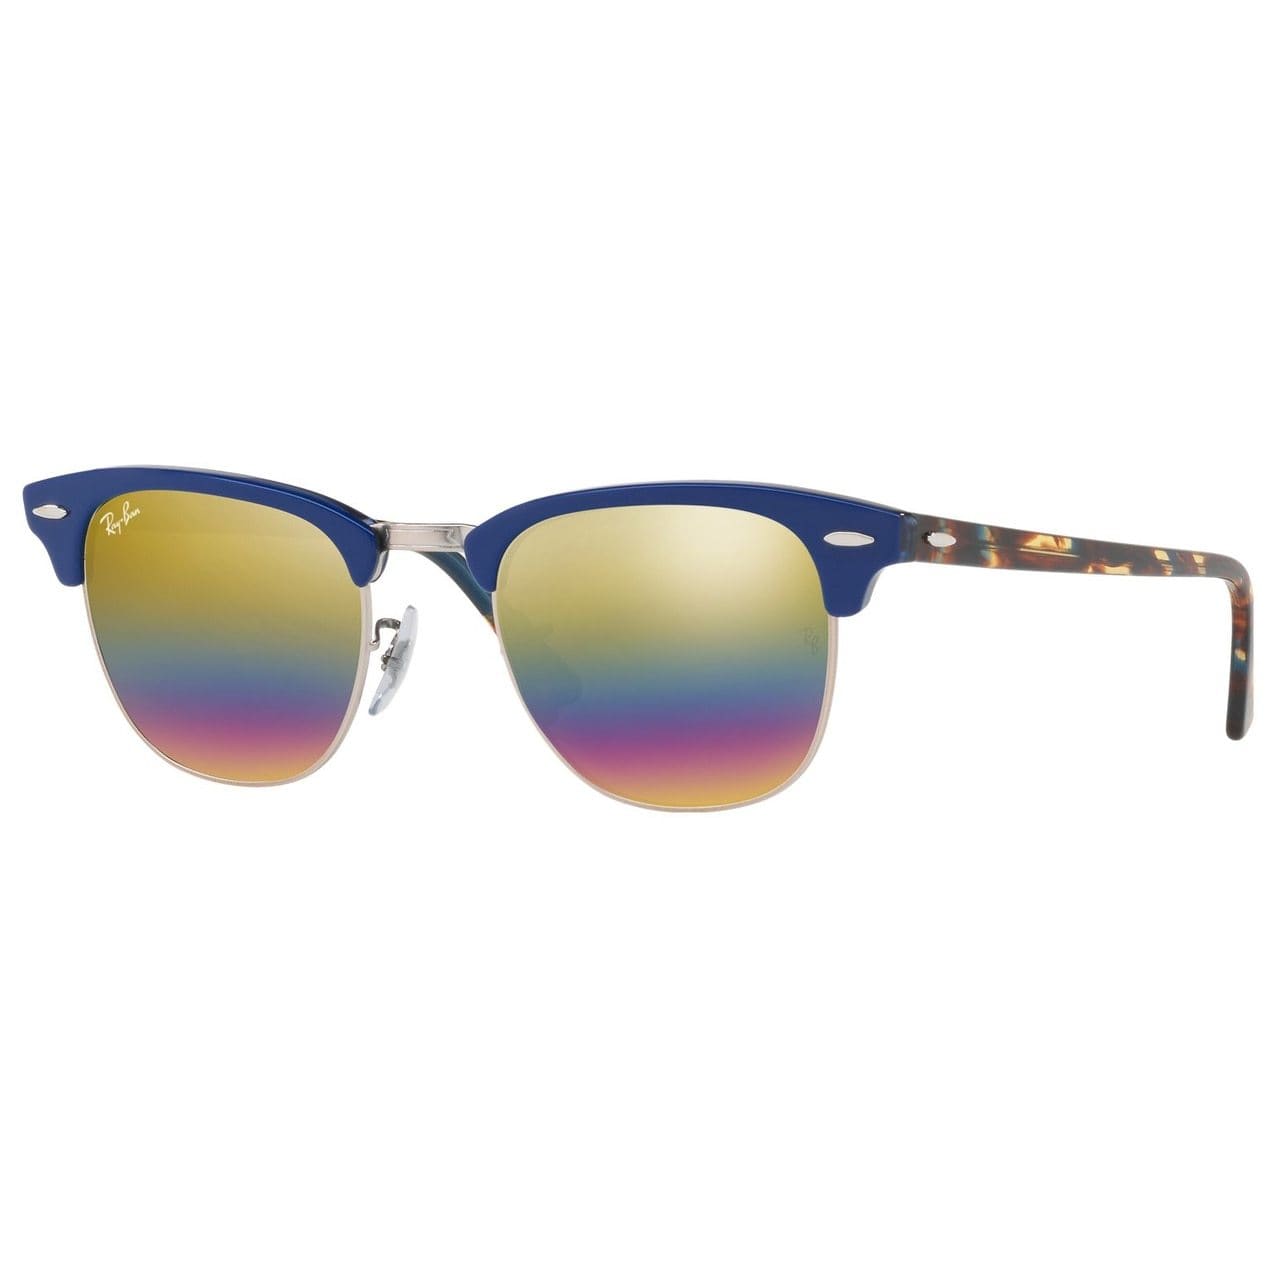 Ray-Ban RB3016 1223C4 Clubmaster Classic Blue Frame Gold Rainbow Flash Lens Sunglasses 8053672732108